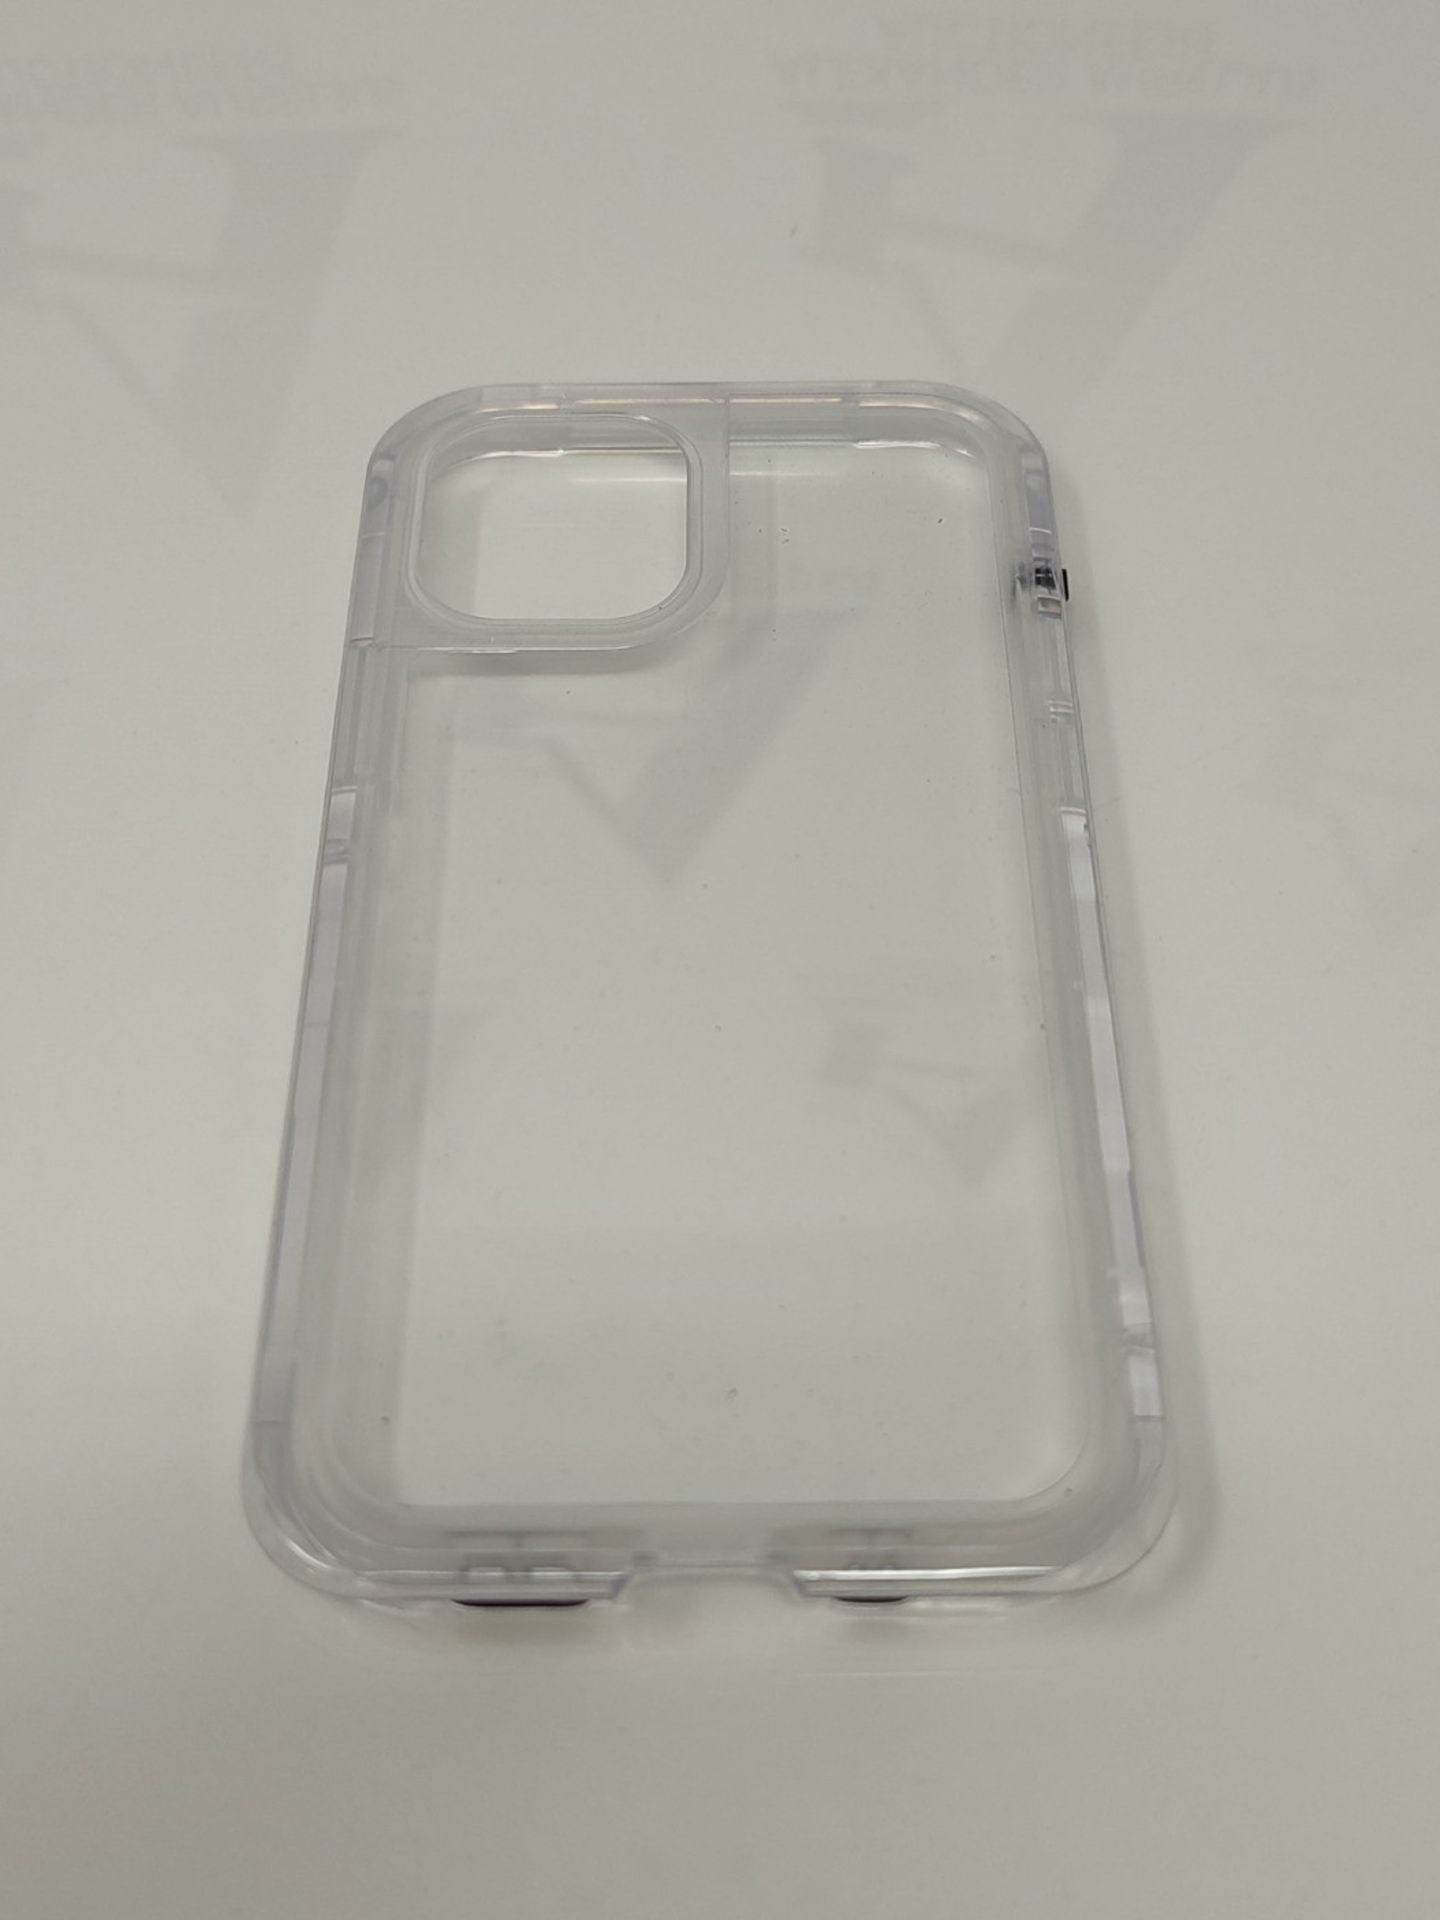 LifeProof for Apple iPhone 12 mini, Slim DropProof, DustProof and SnowProof Case, Next - Image 3 of 3